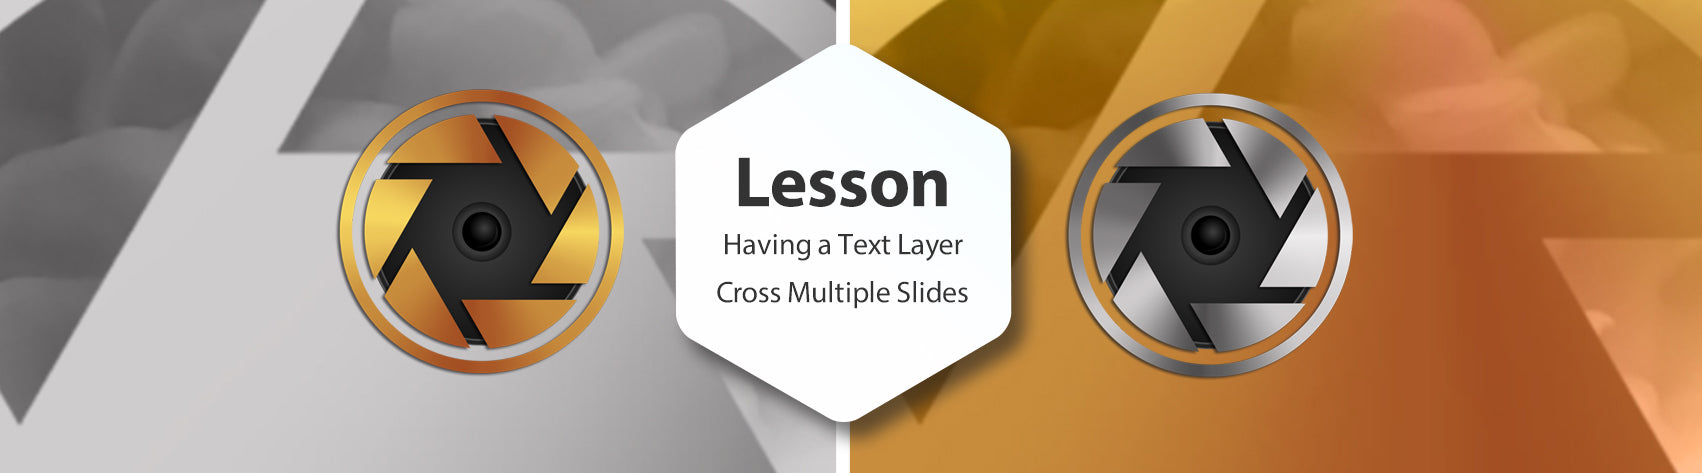 Lesson -  Having a Text Layer Cross Multiple Slides